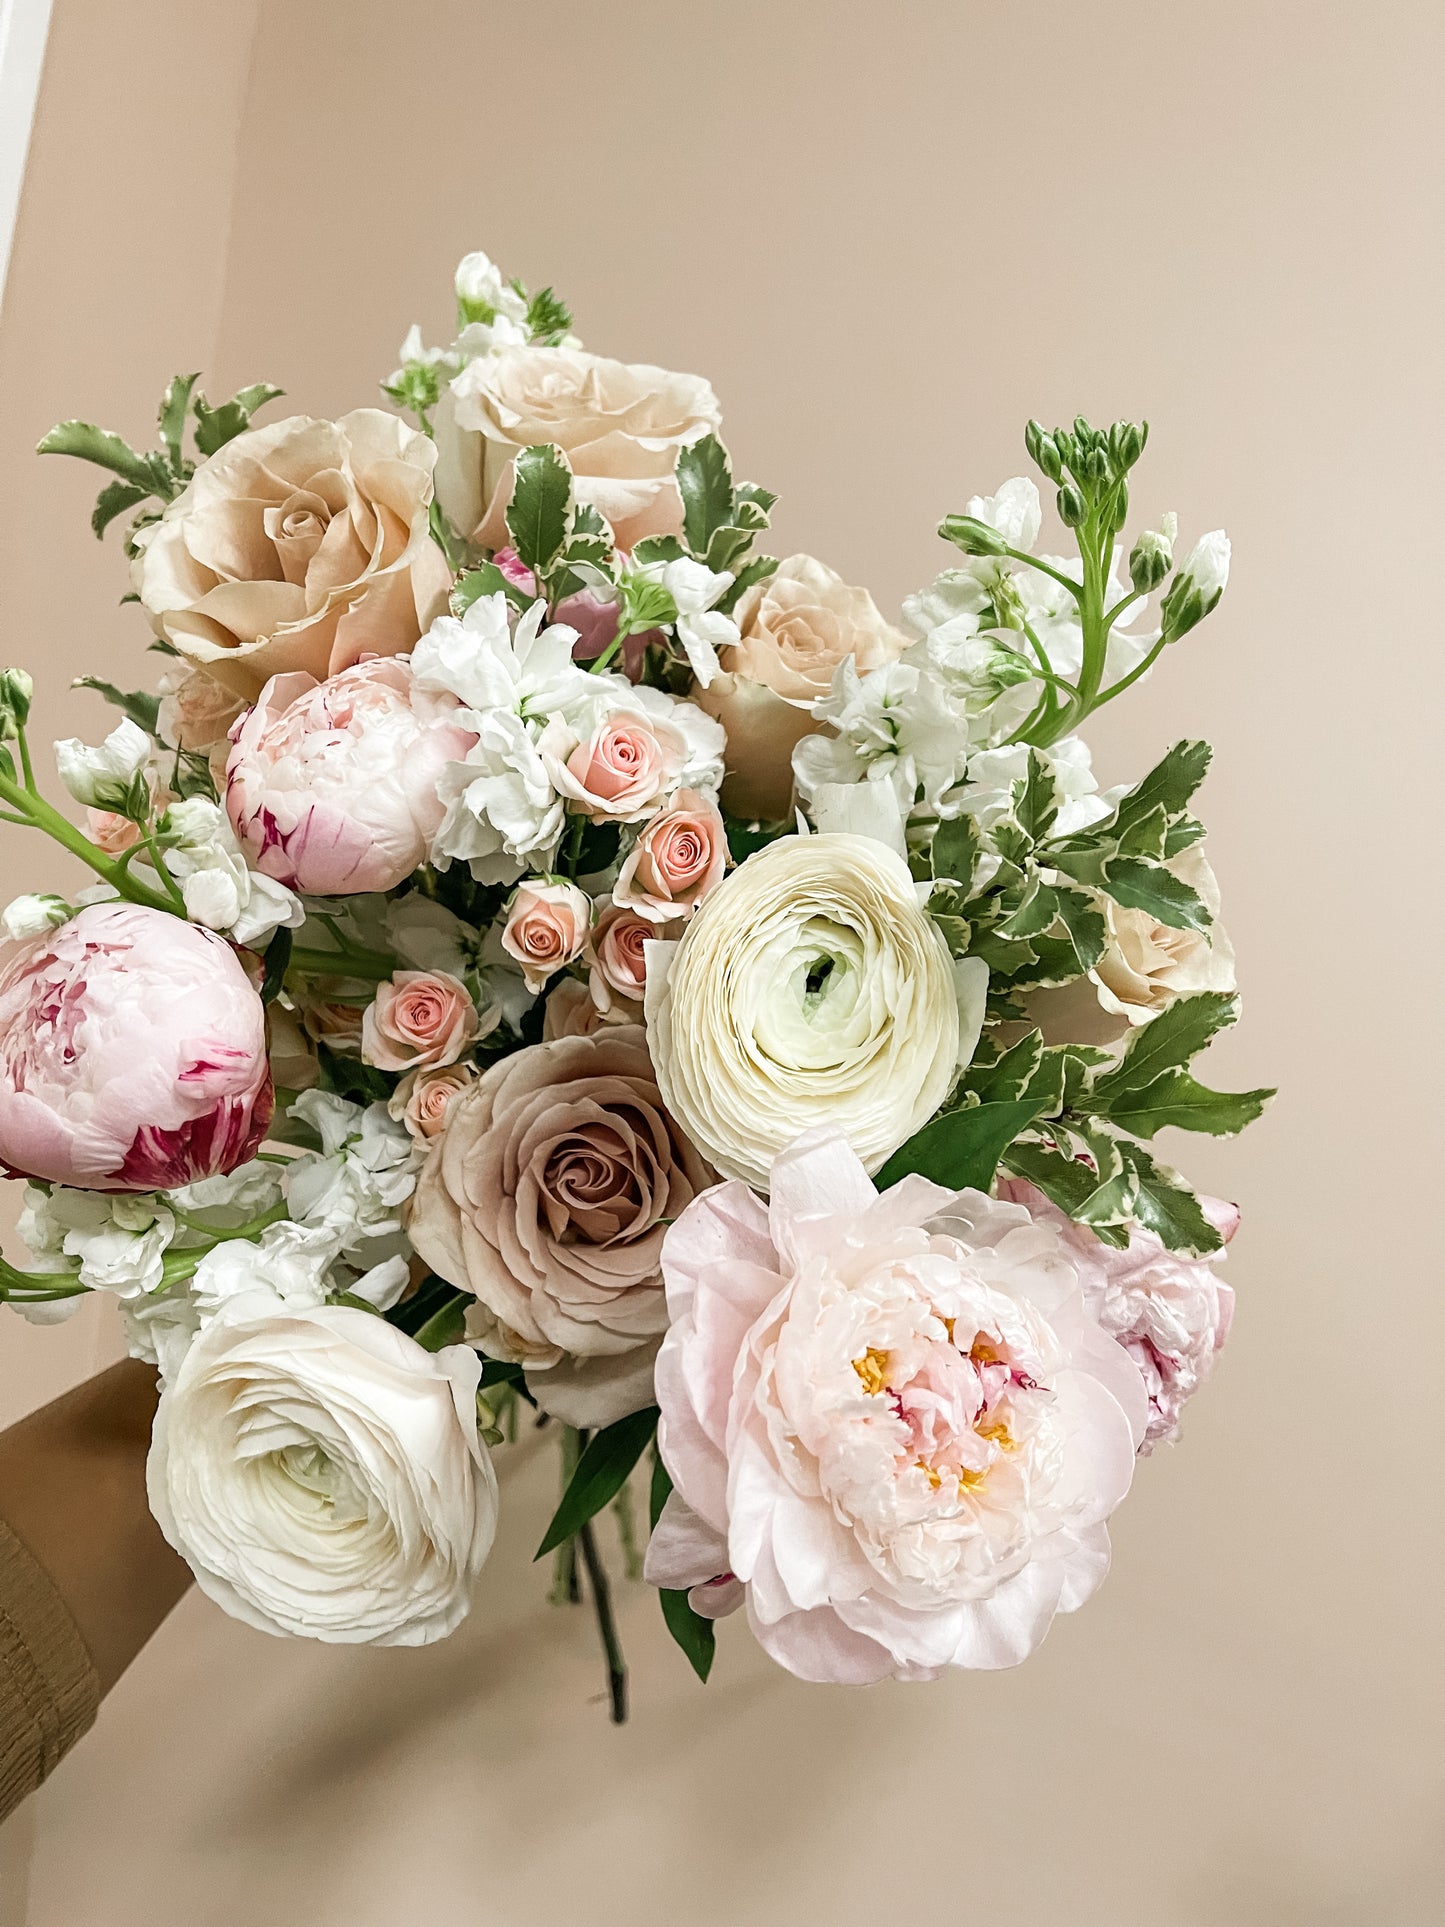 The 'Love in Bloom' Spring Bouquet |  MOTHER'S DAY PRE-ORDER (May 8-12)